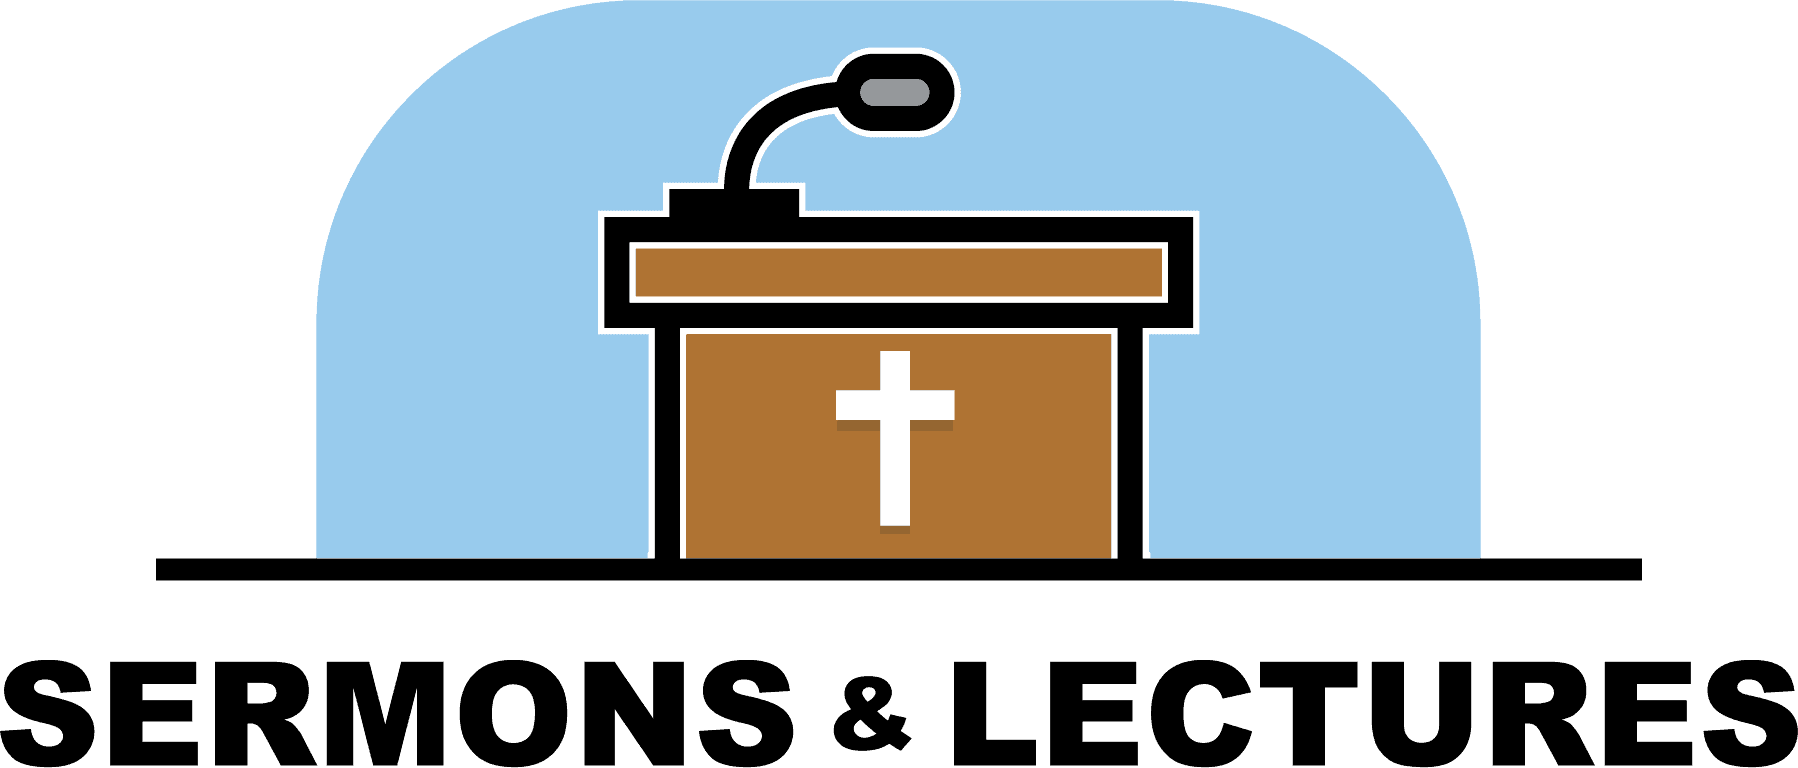 Sermons + Lectures graphic